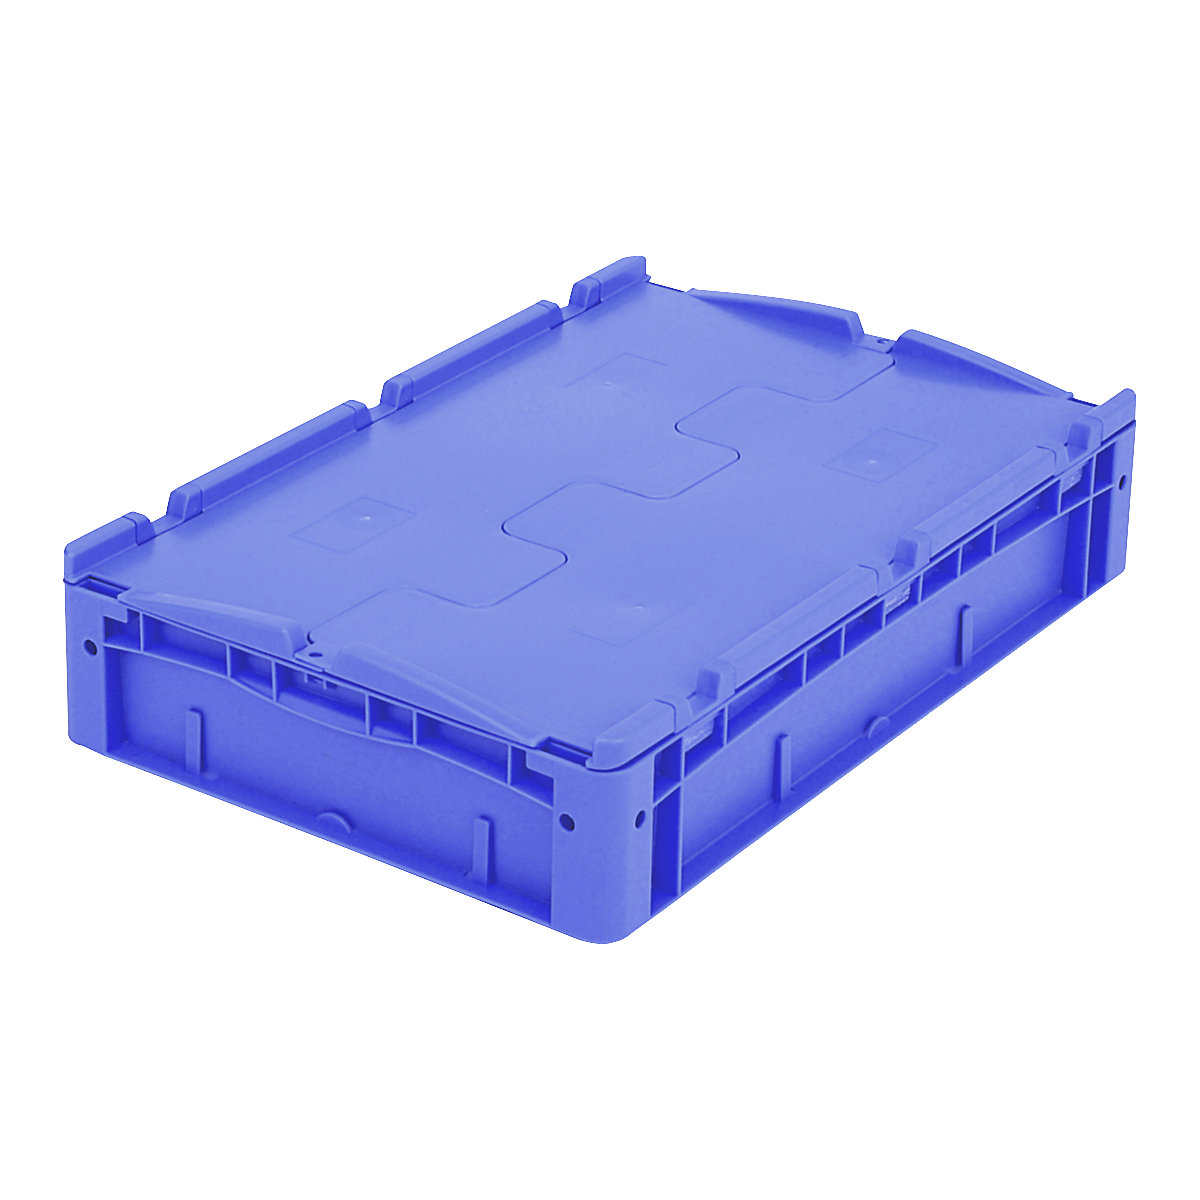 XL Euro stacking container – BITO, with 2-section hinged lid, LxWxH 600 x 400 x 138 mm-15